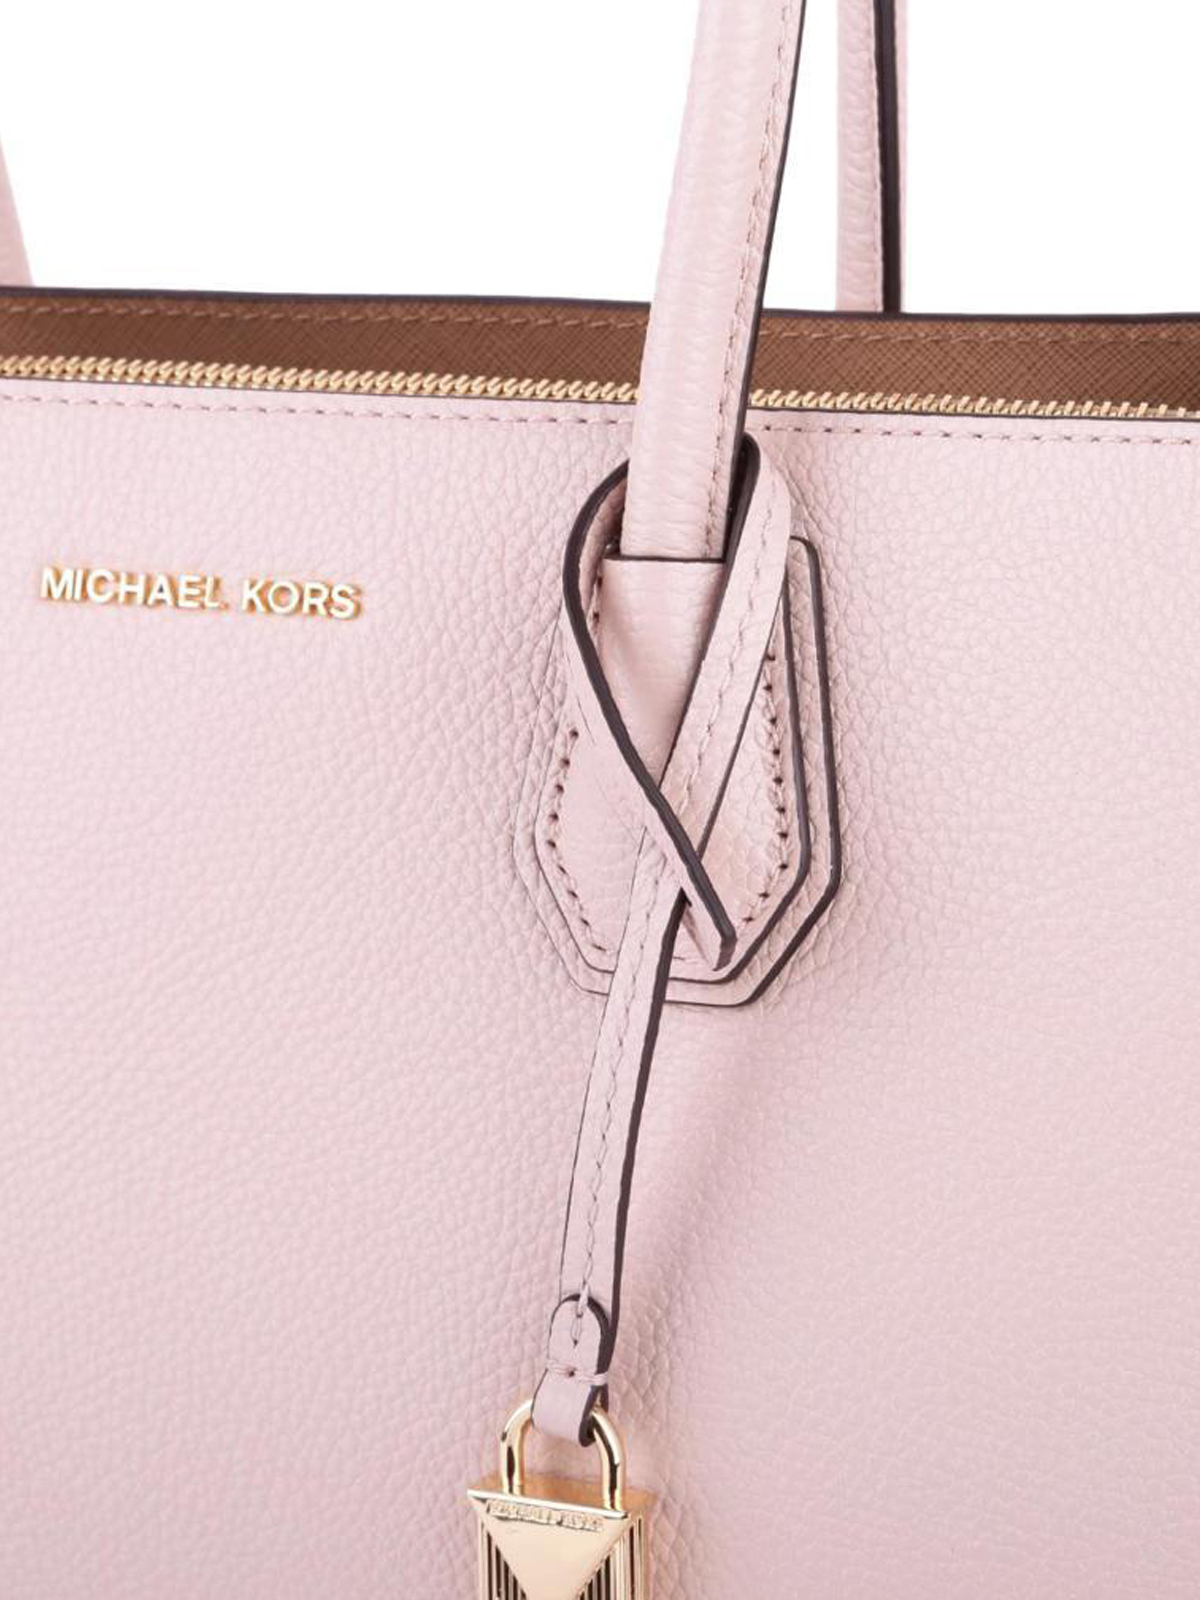 Michael Kors Light Pink Leather Small Mercer Tote - ShopStyle